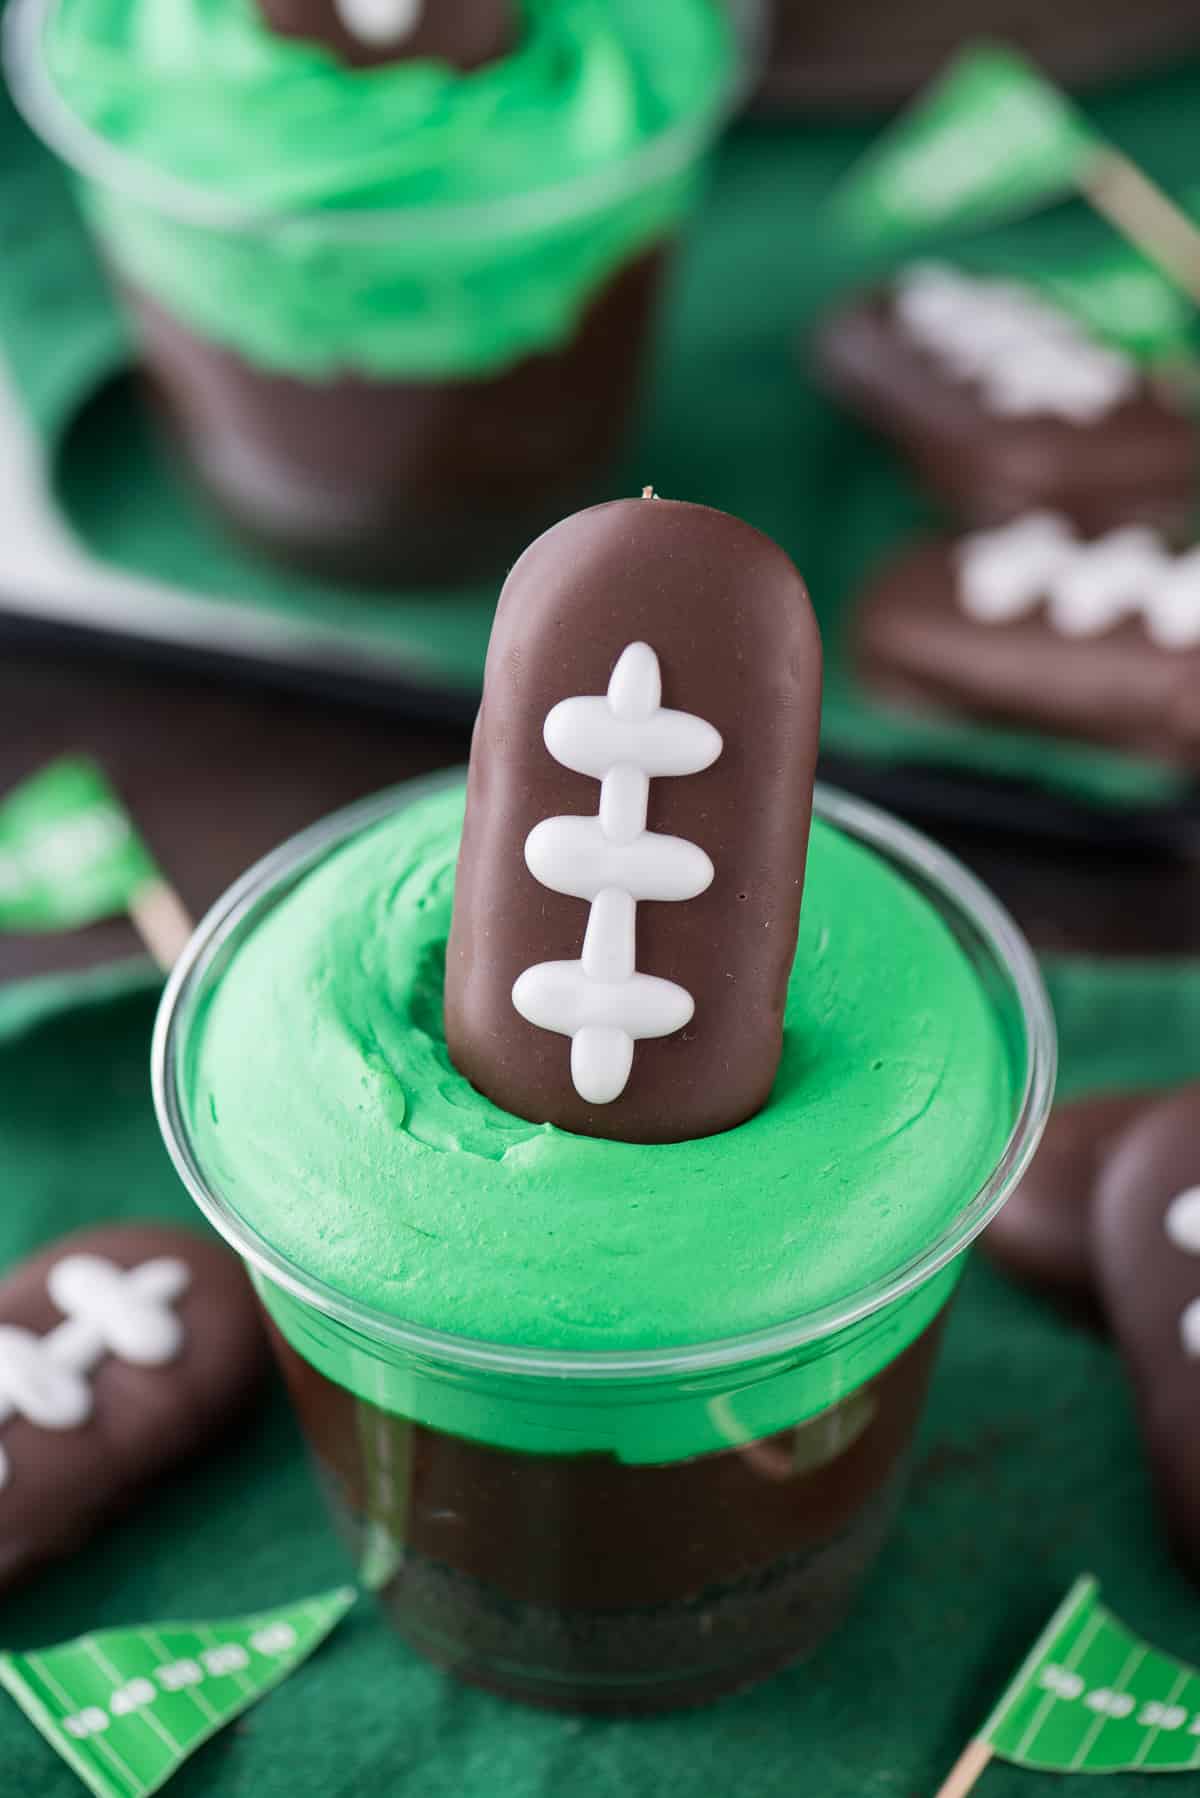 Homemade Football themed dirt cups with bright green frosting on a green napkin.